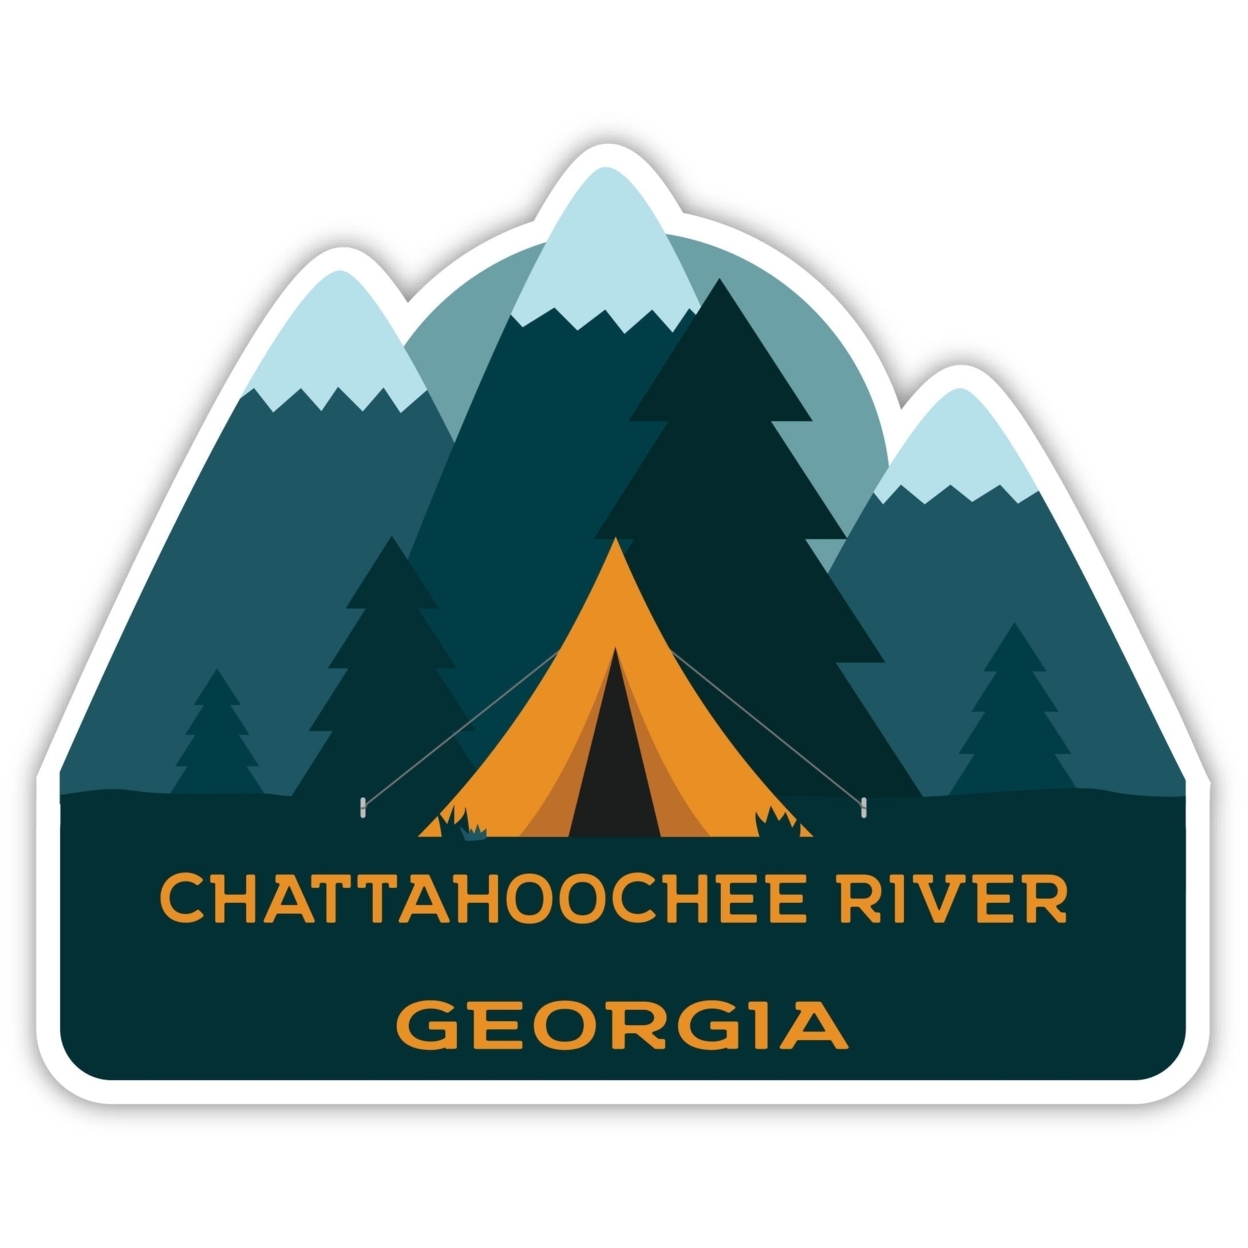 Chattahoochee River Georgia Souvenir Decorative Stickers (Choose Theme And Size) - 4-Pack, 10-Inch, Tent